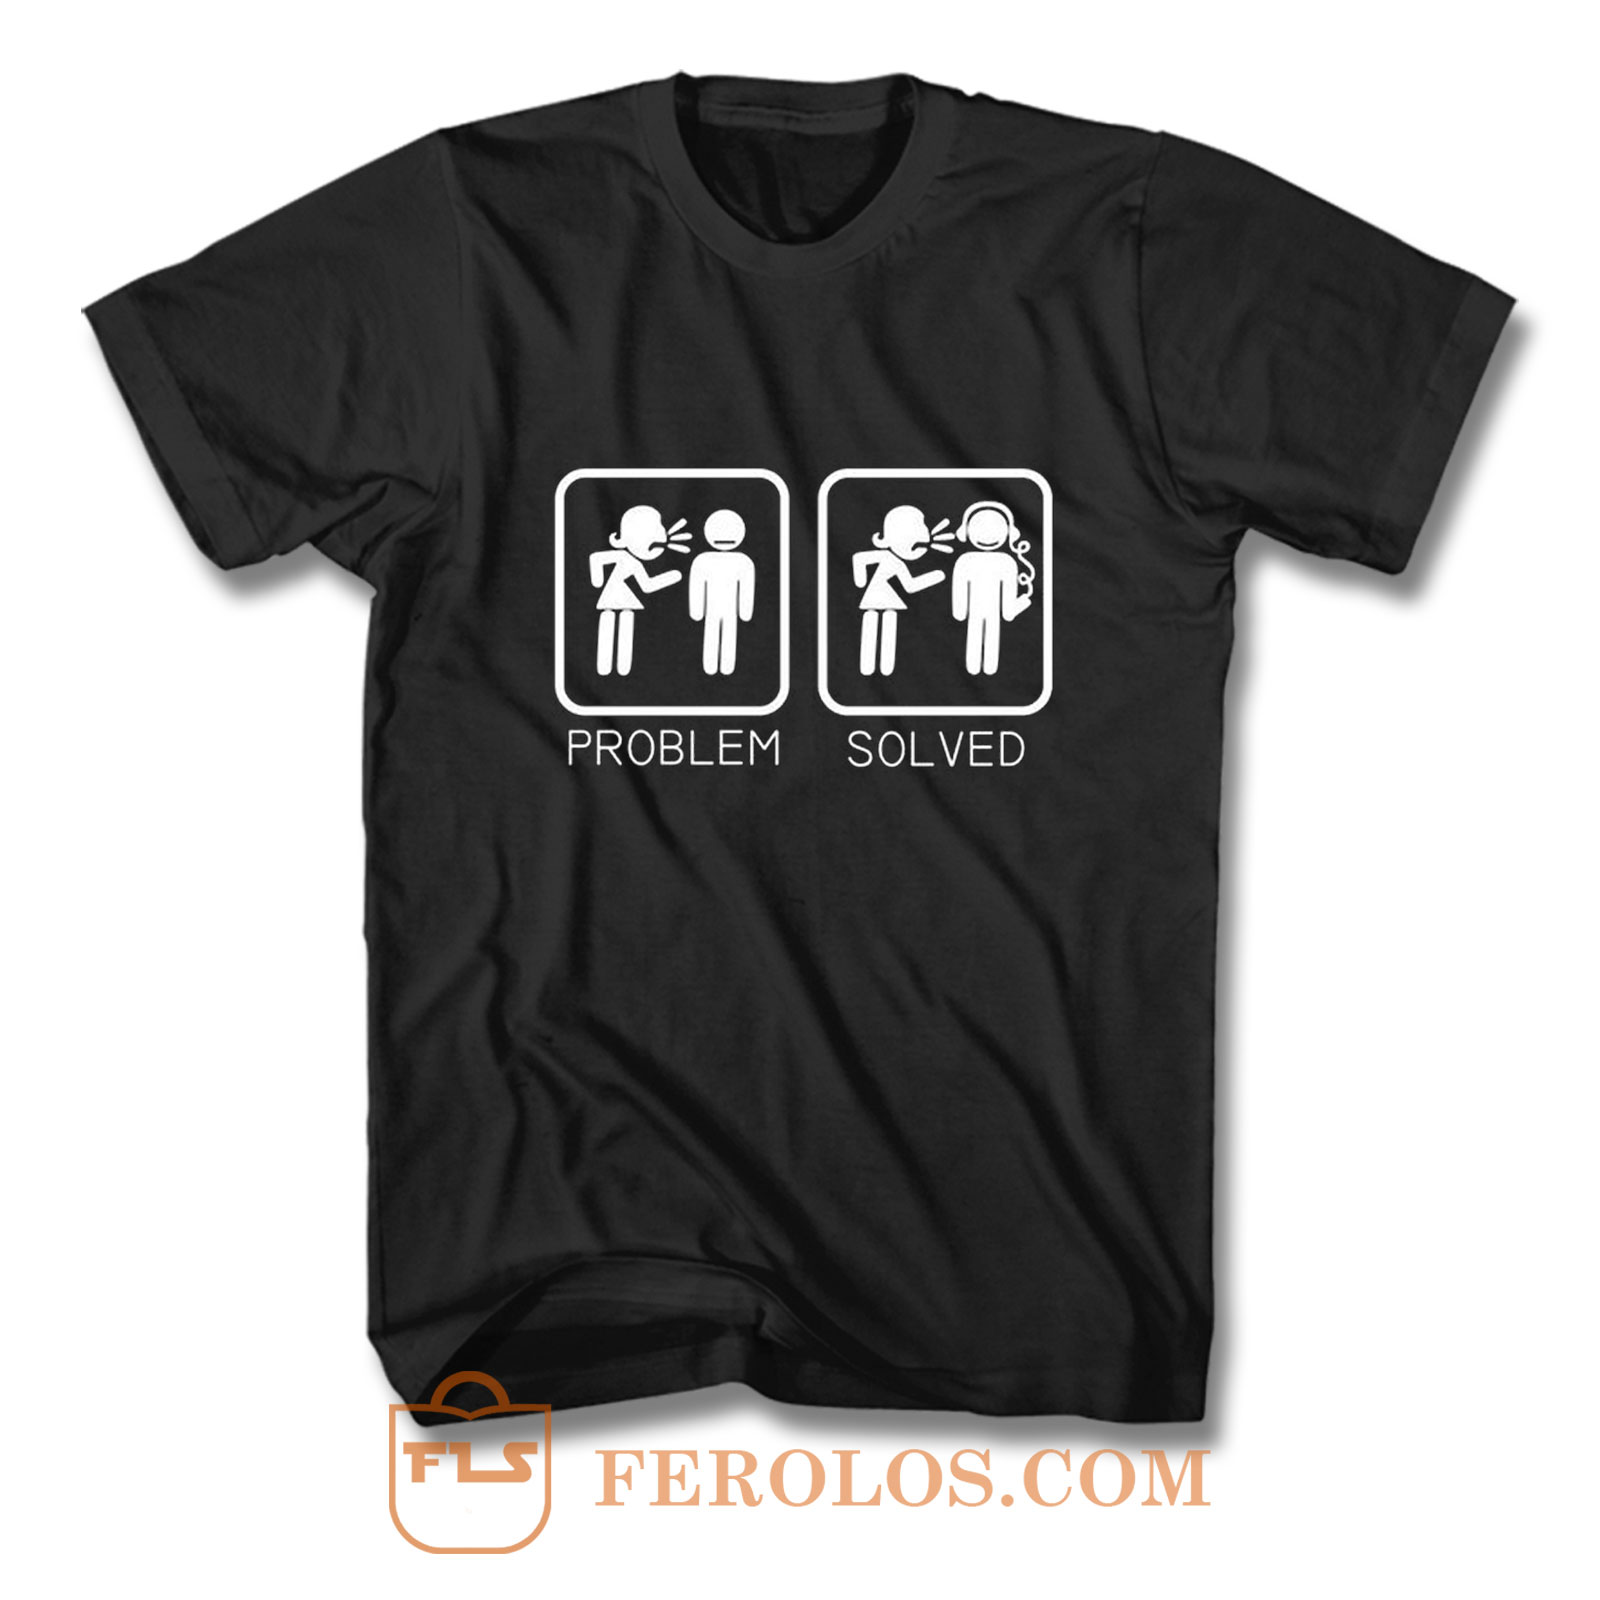 Wife Nagging Humour Problem Solved T Shirt Ferolos